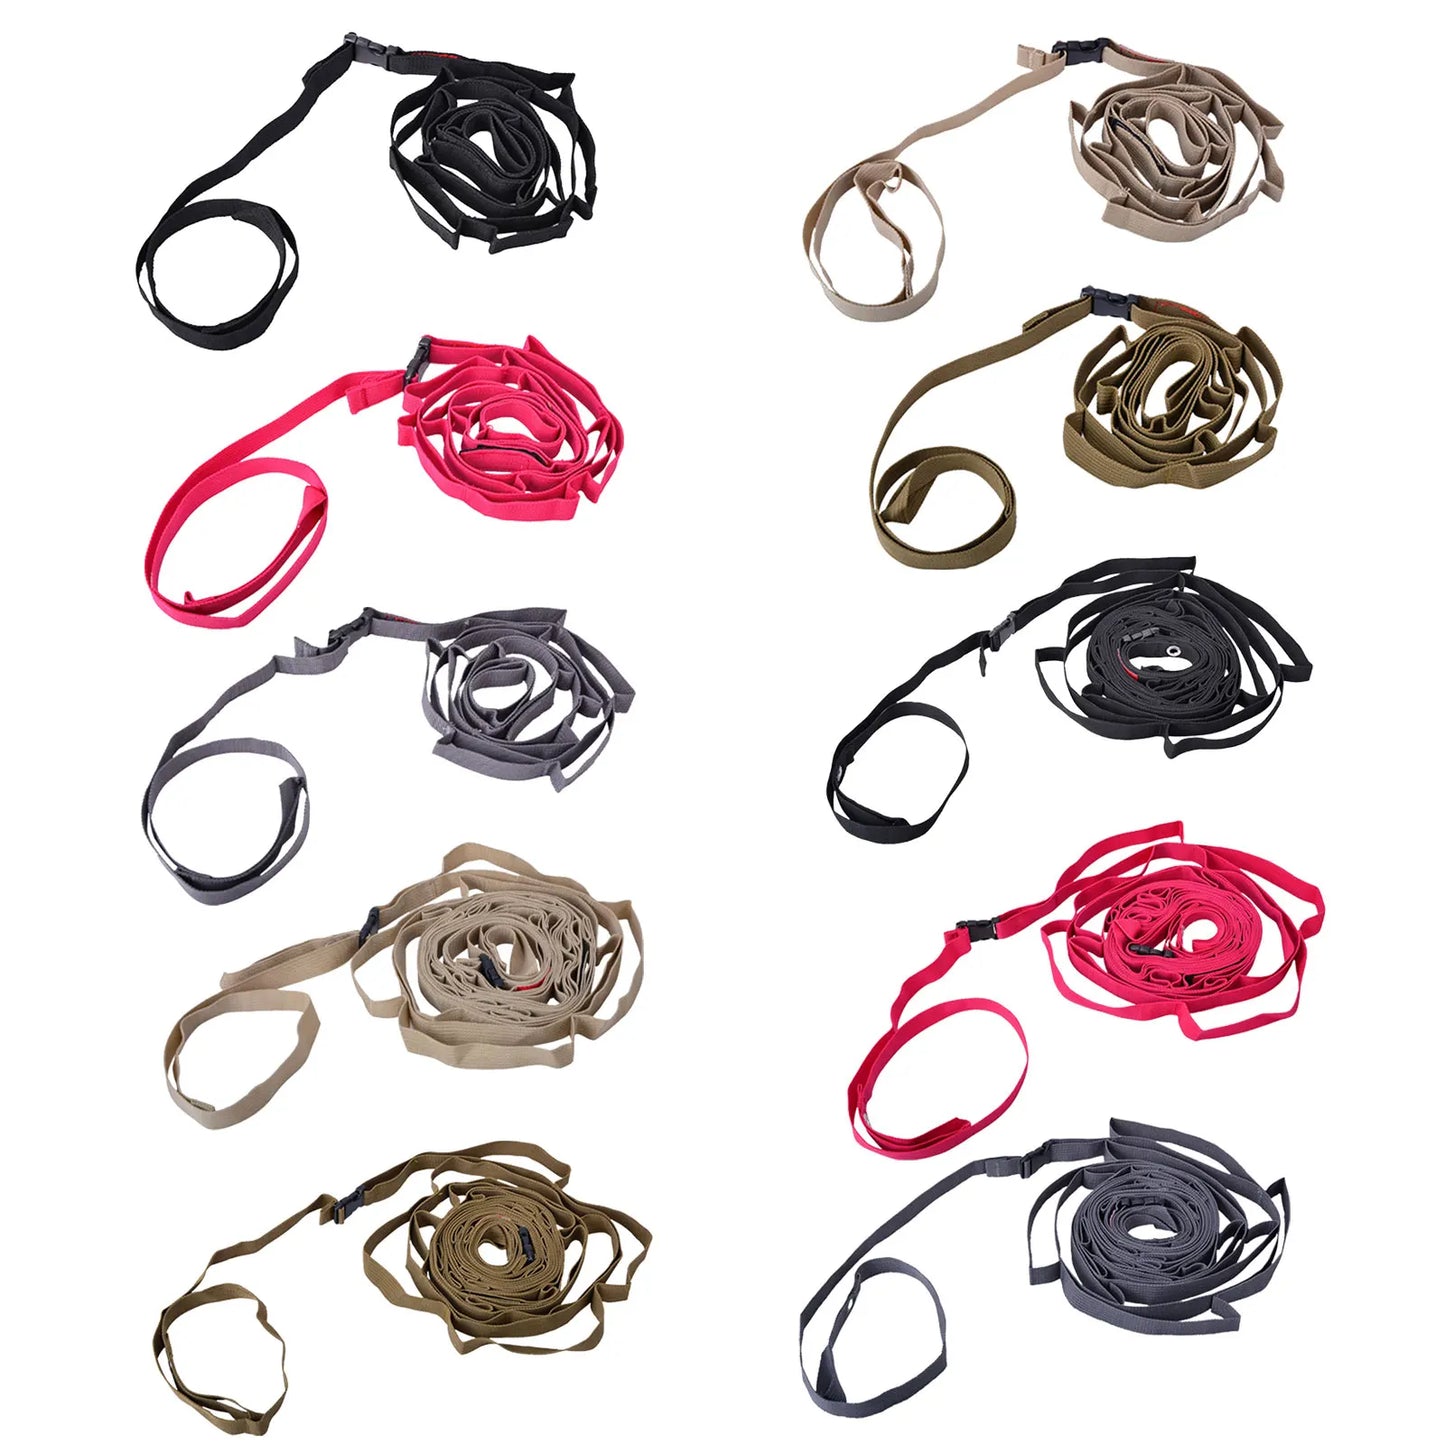 1.8/5m Outdoor Hanging Rope draagbare lanyard luifel hanger camping camping opbergband backpacken wandeltentoevoegang accessoires